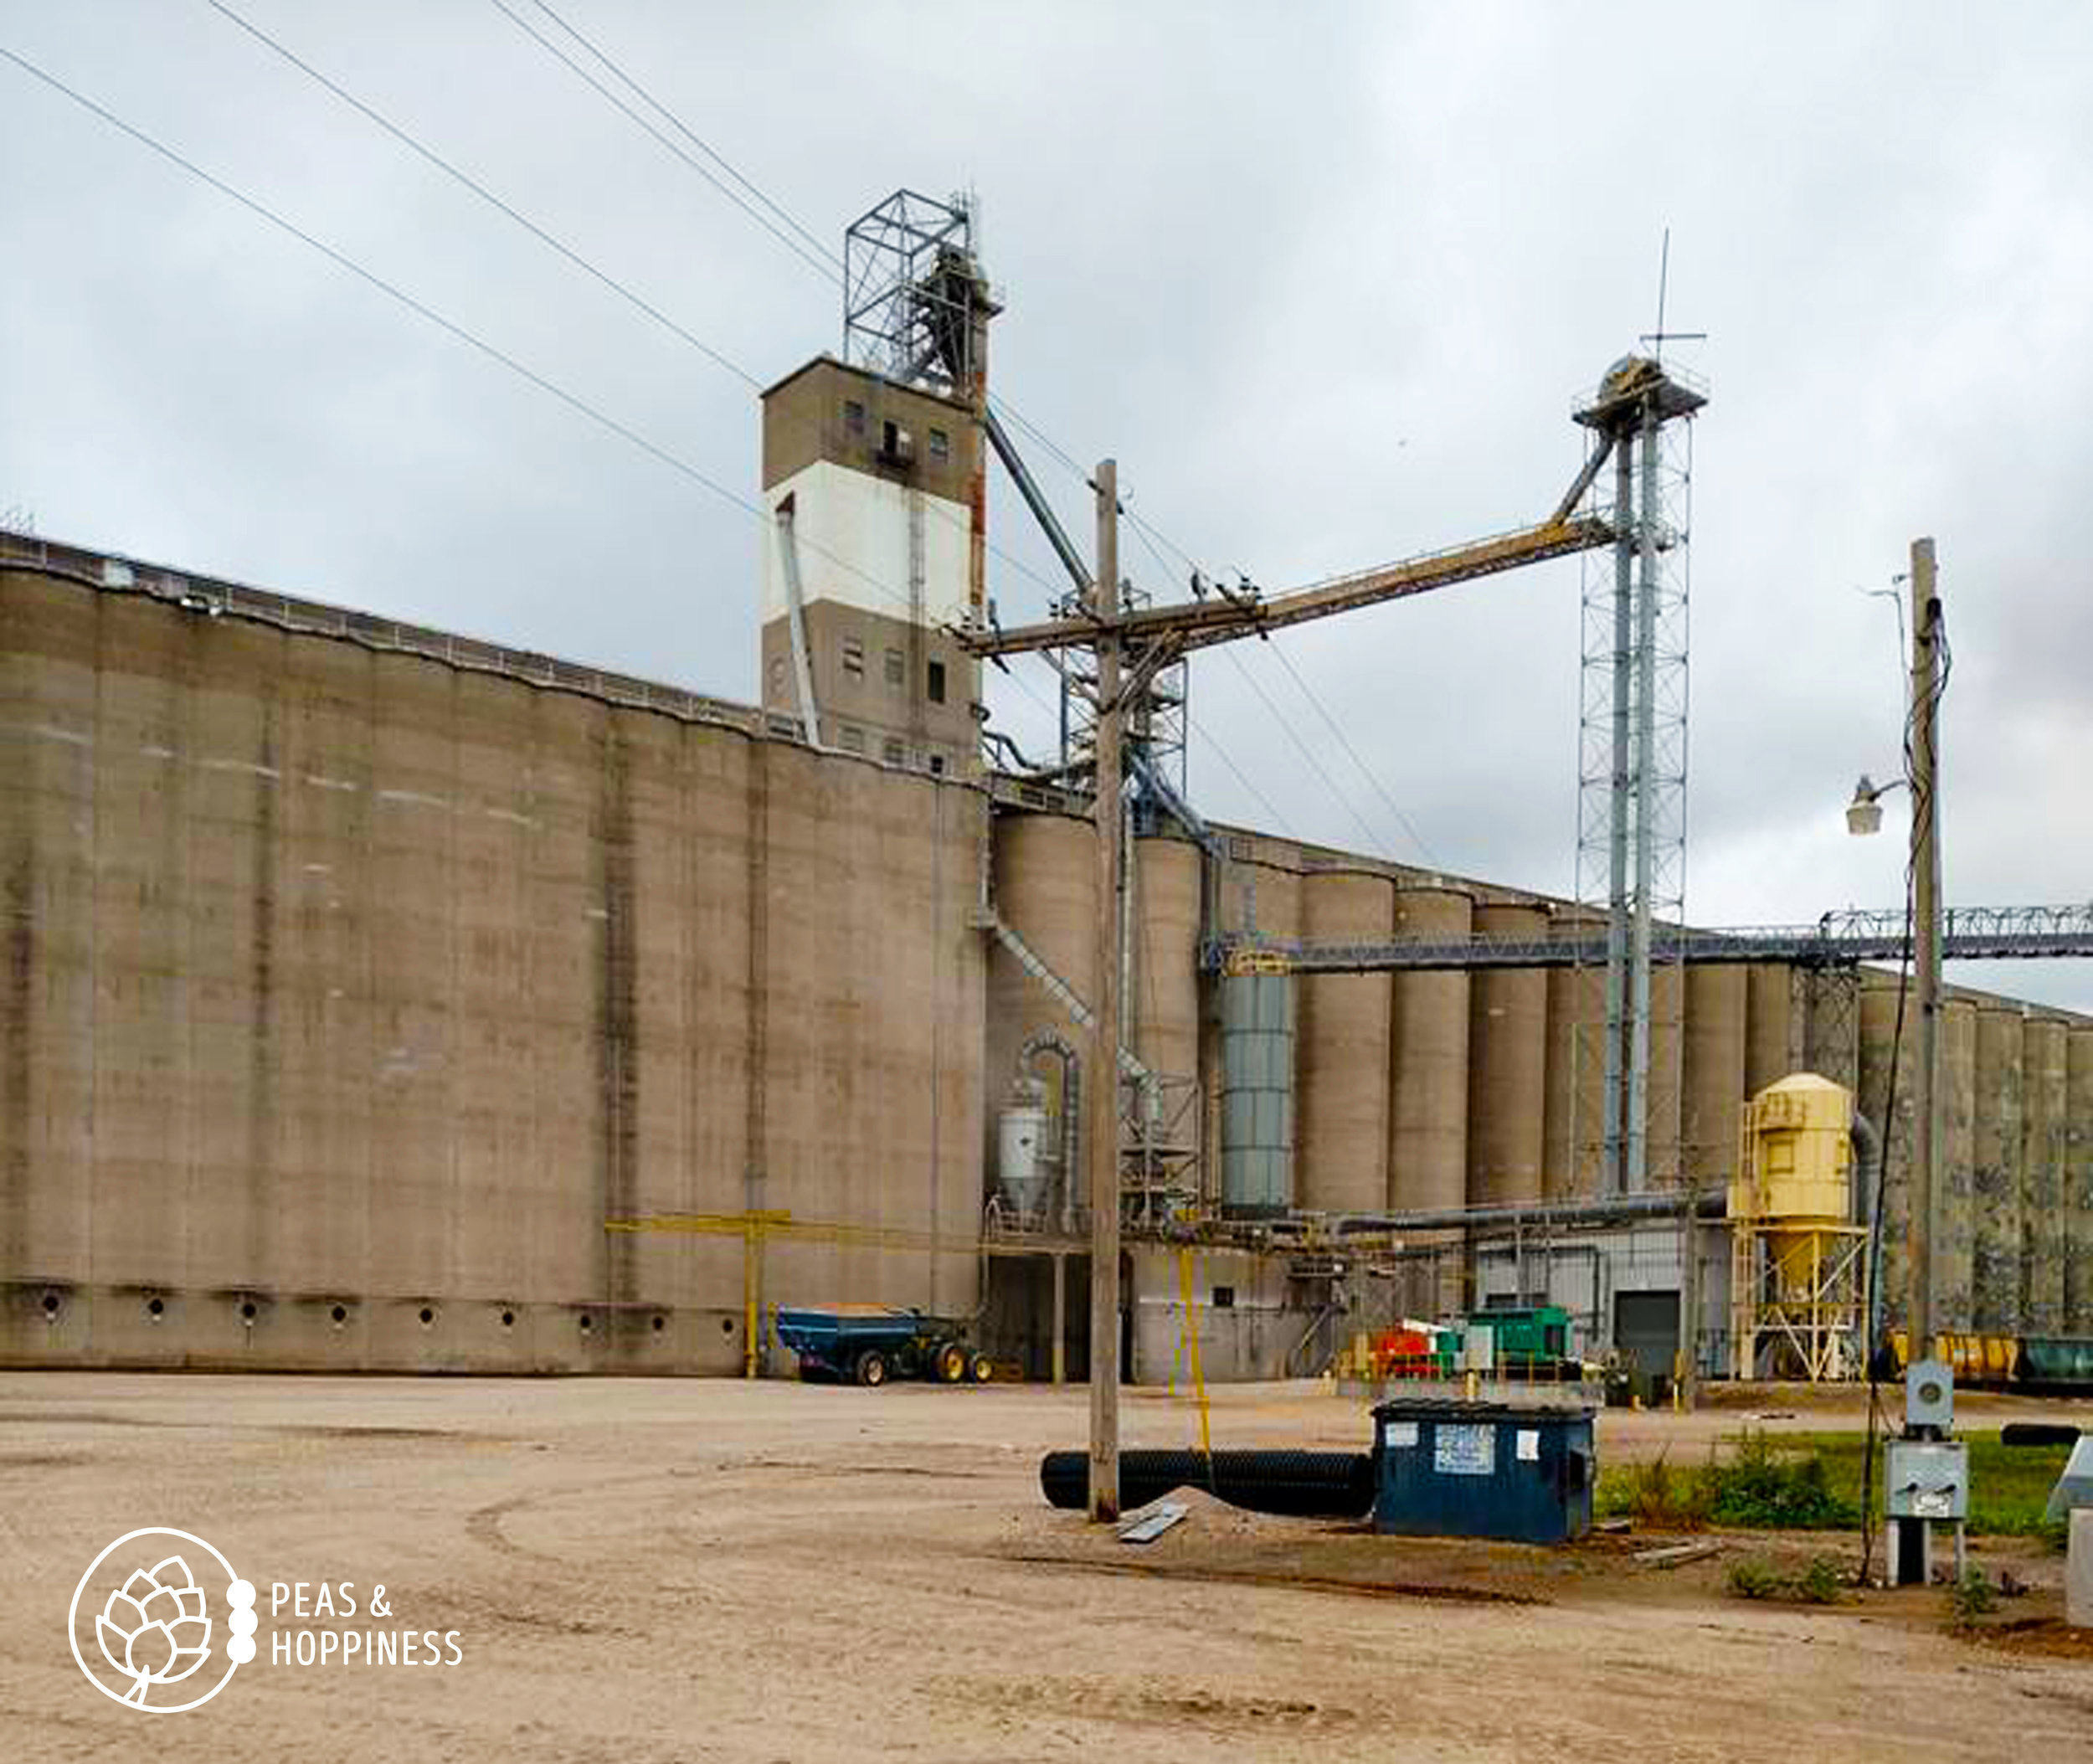 A grain elevator, where grain is taken and stored, then loaded into trains and trucks and shipped across the nation.